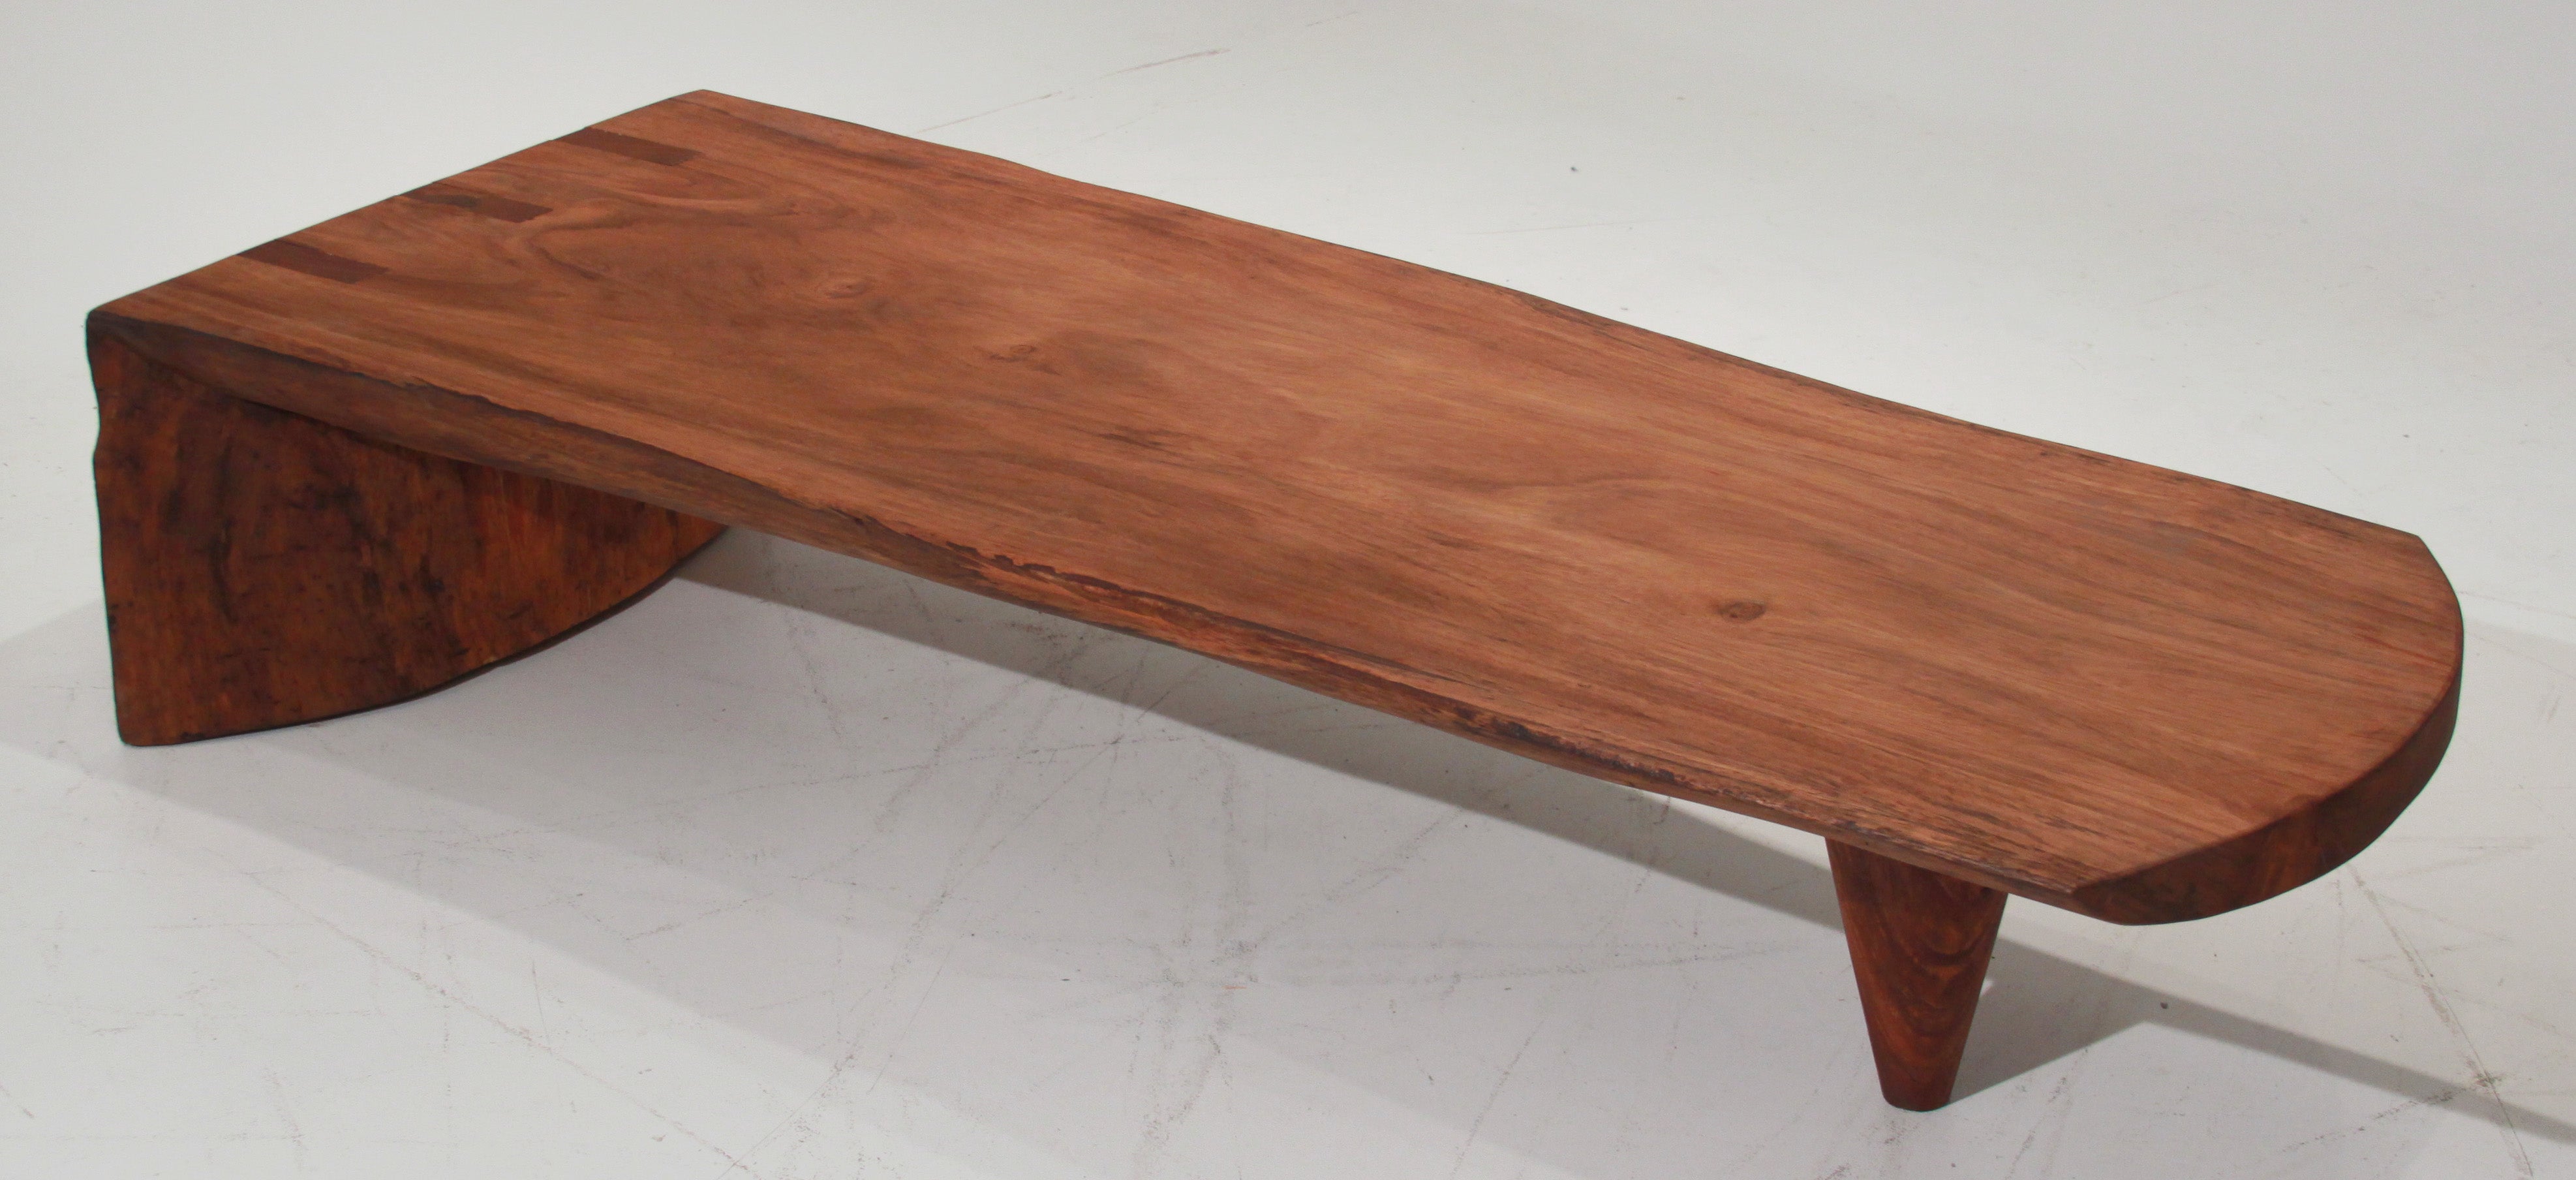 Tunico T. Minimalist Reclaimed Tamboril Wood Coffee Table or Bench  For Sale